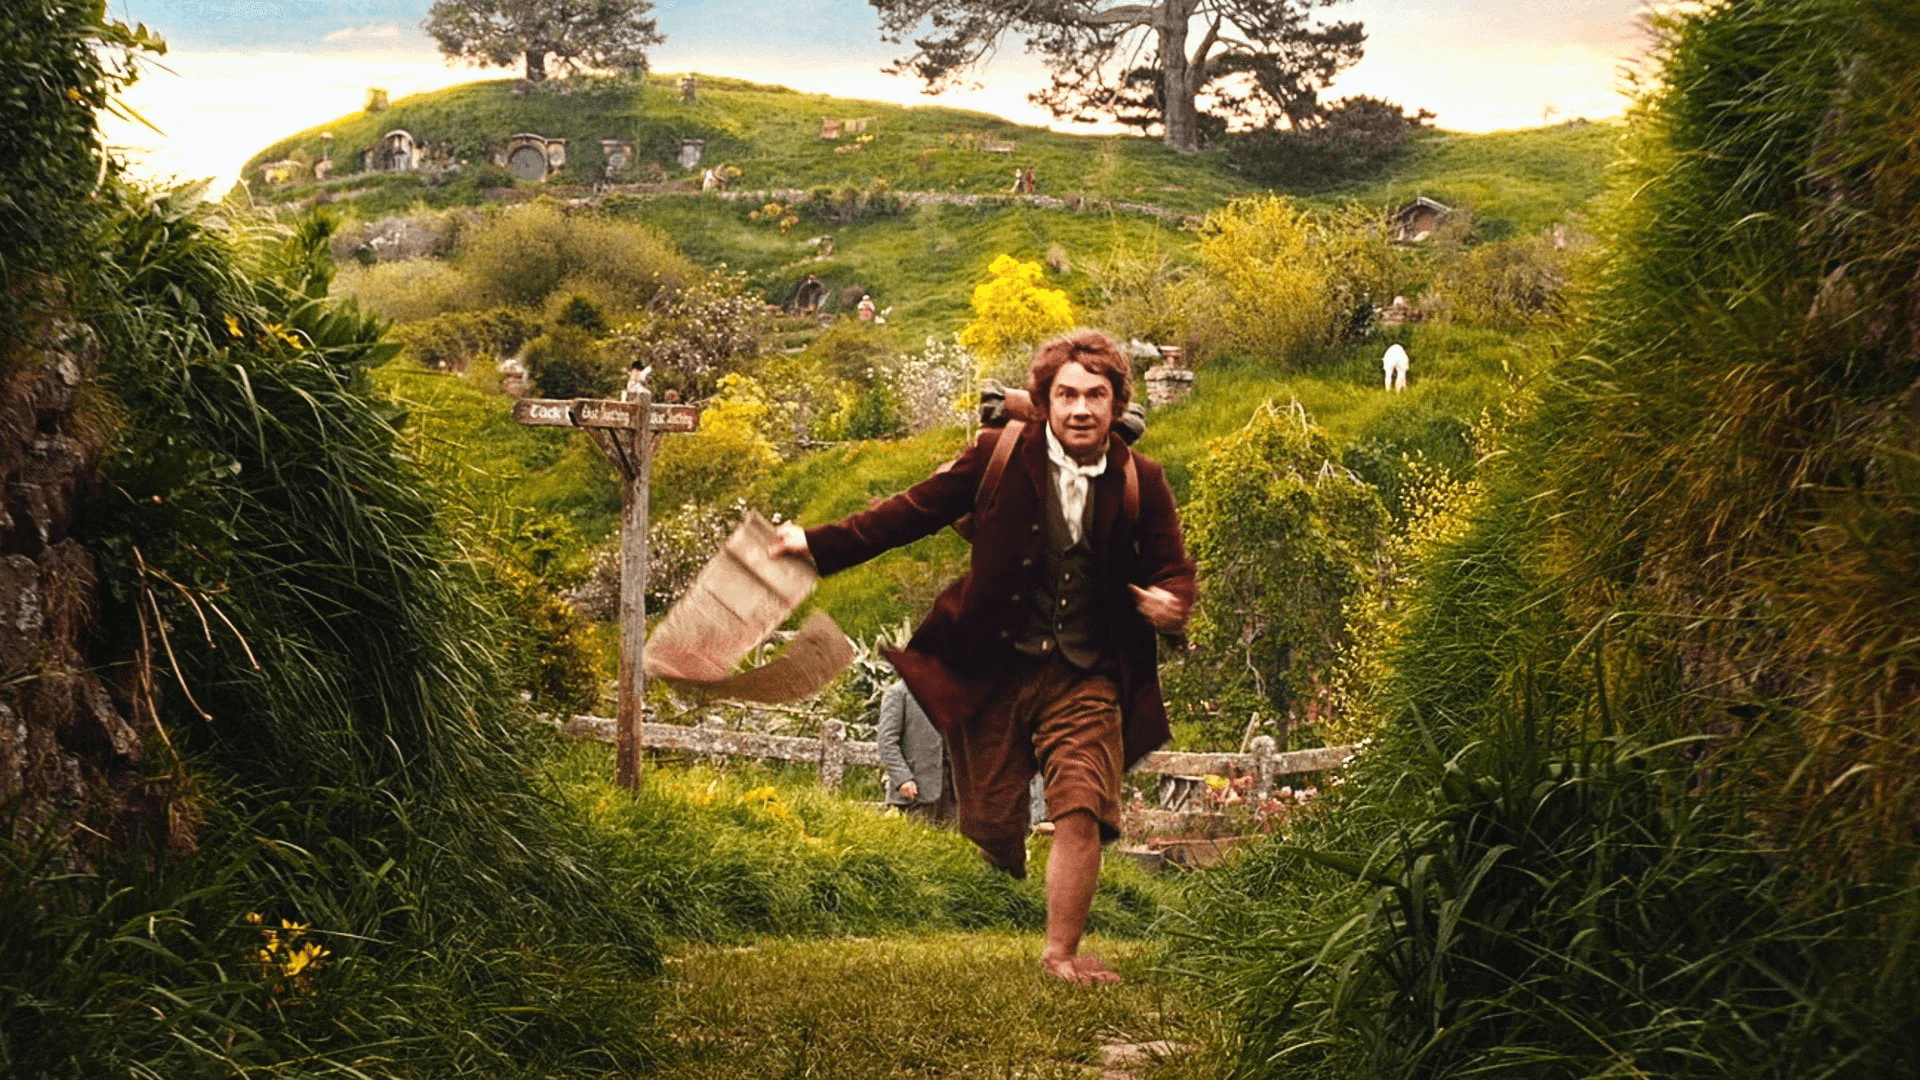 Watch The Hobbit: An Unexpected Journey, directed by Peter Jackson, on Hulu through HBO Max (make sure it is a watchlist add!) 